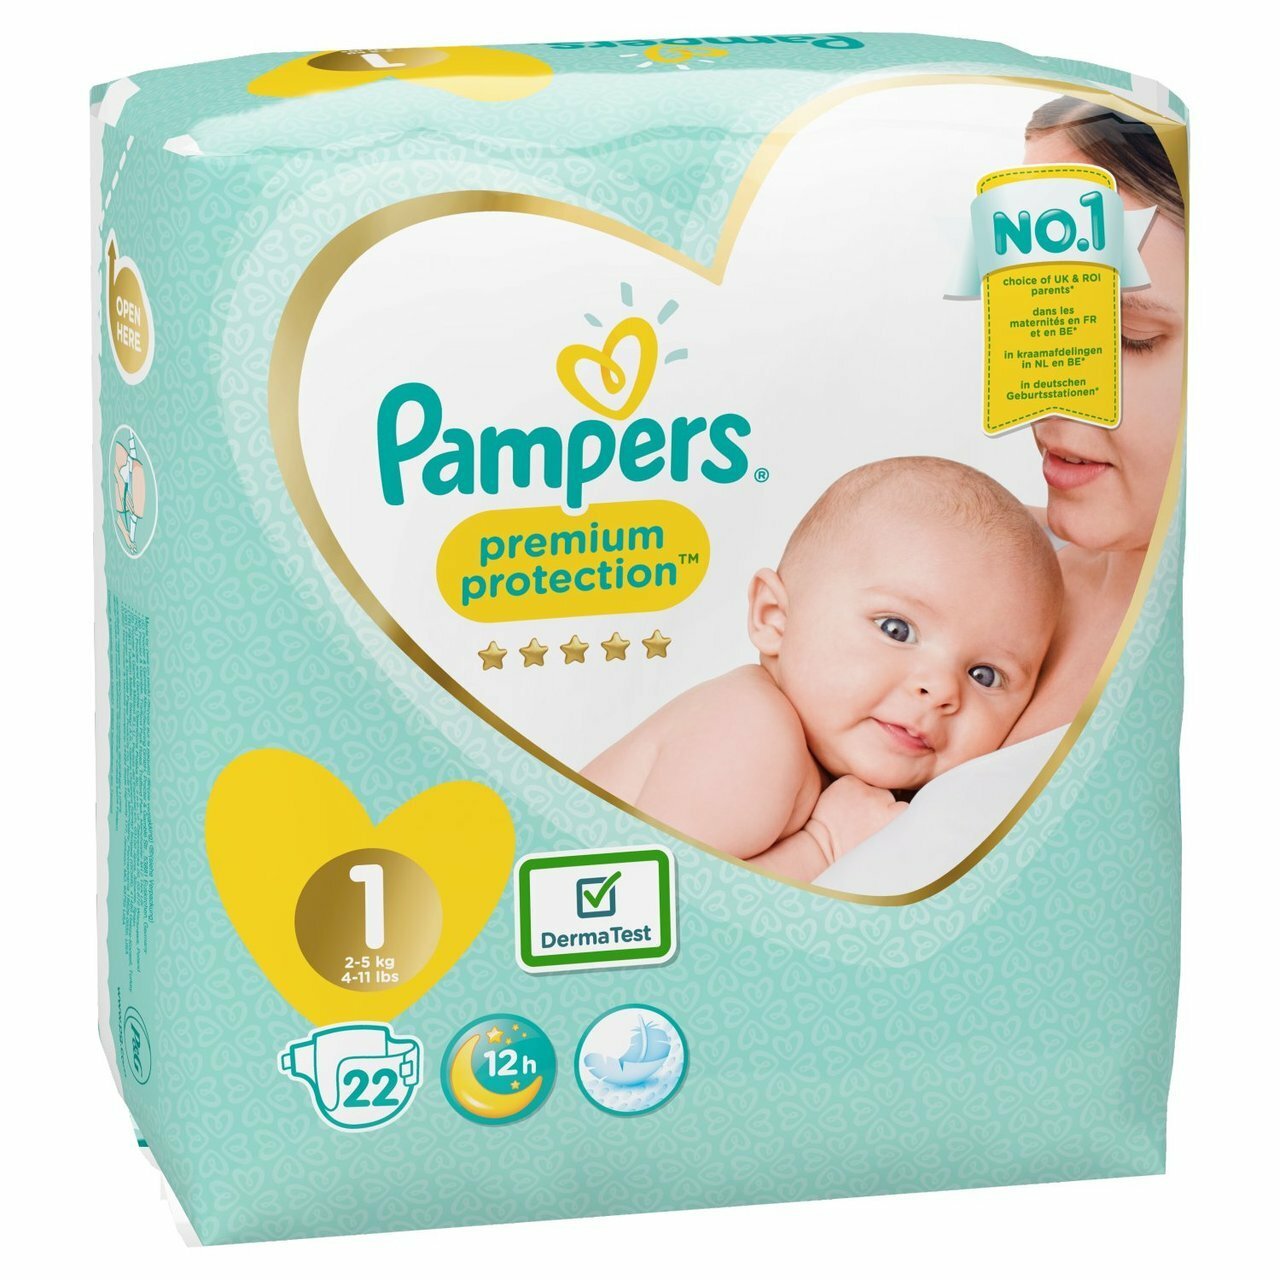 PAMPERS PREMIUM PROTECTION SENSITIVE SIZE1 x22/Pack, 2-5kg CARRY PACK